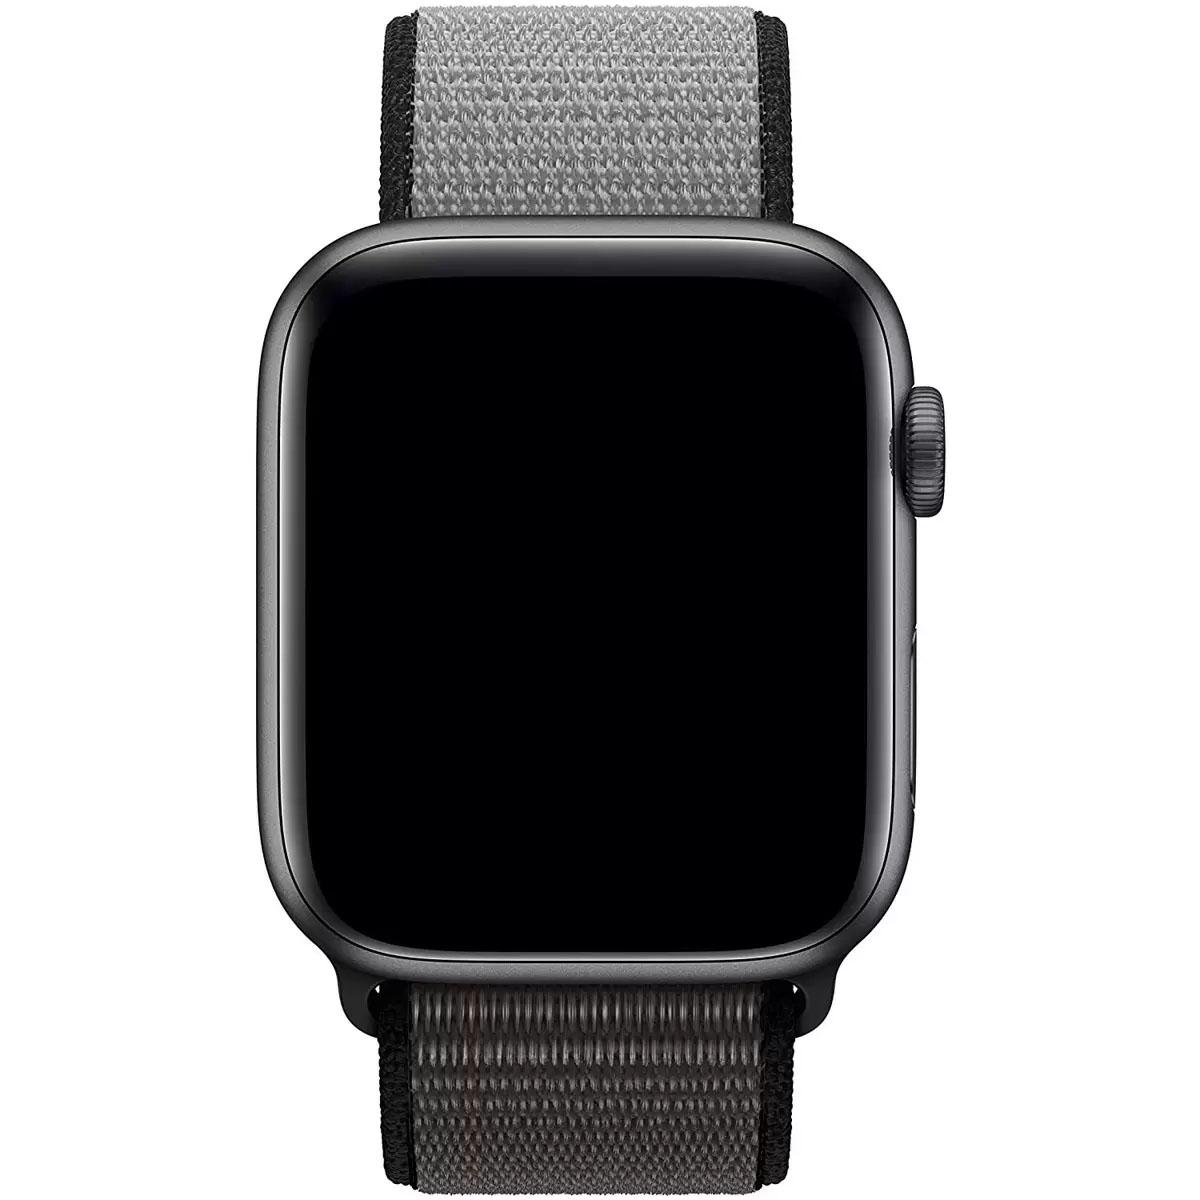 Apple Watch Sport Loop Band for $29 Shipped